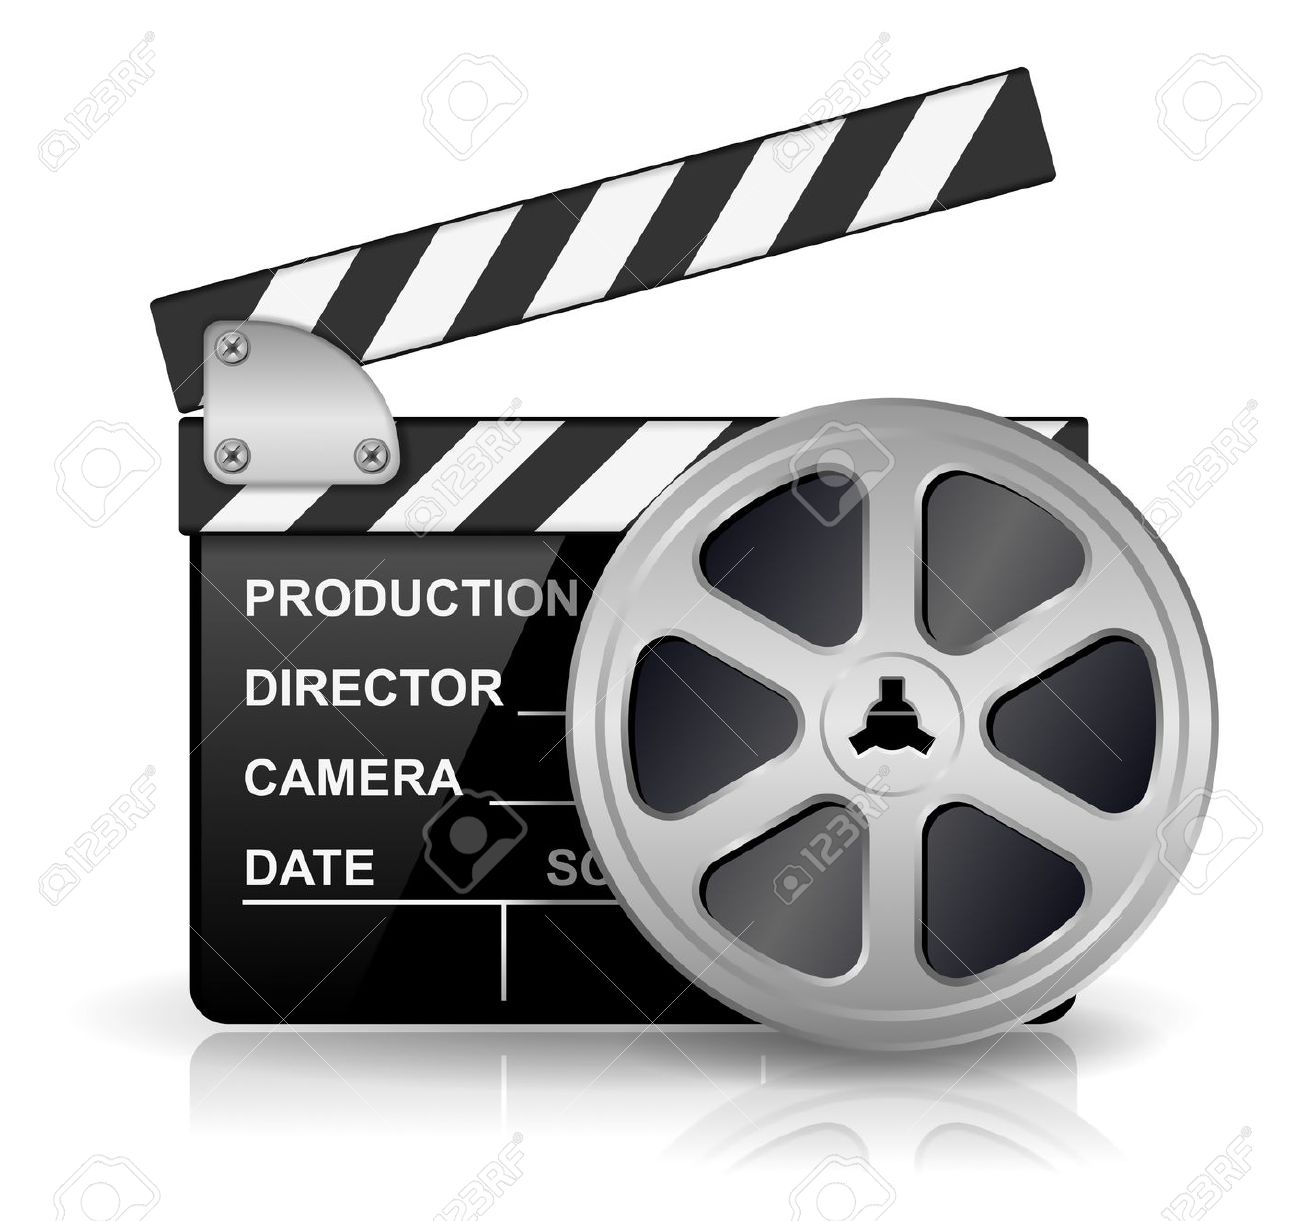 video production clipart - photo #15